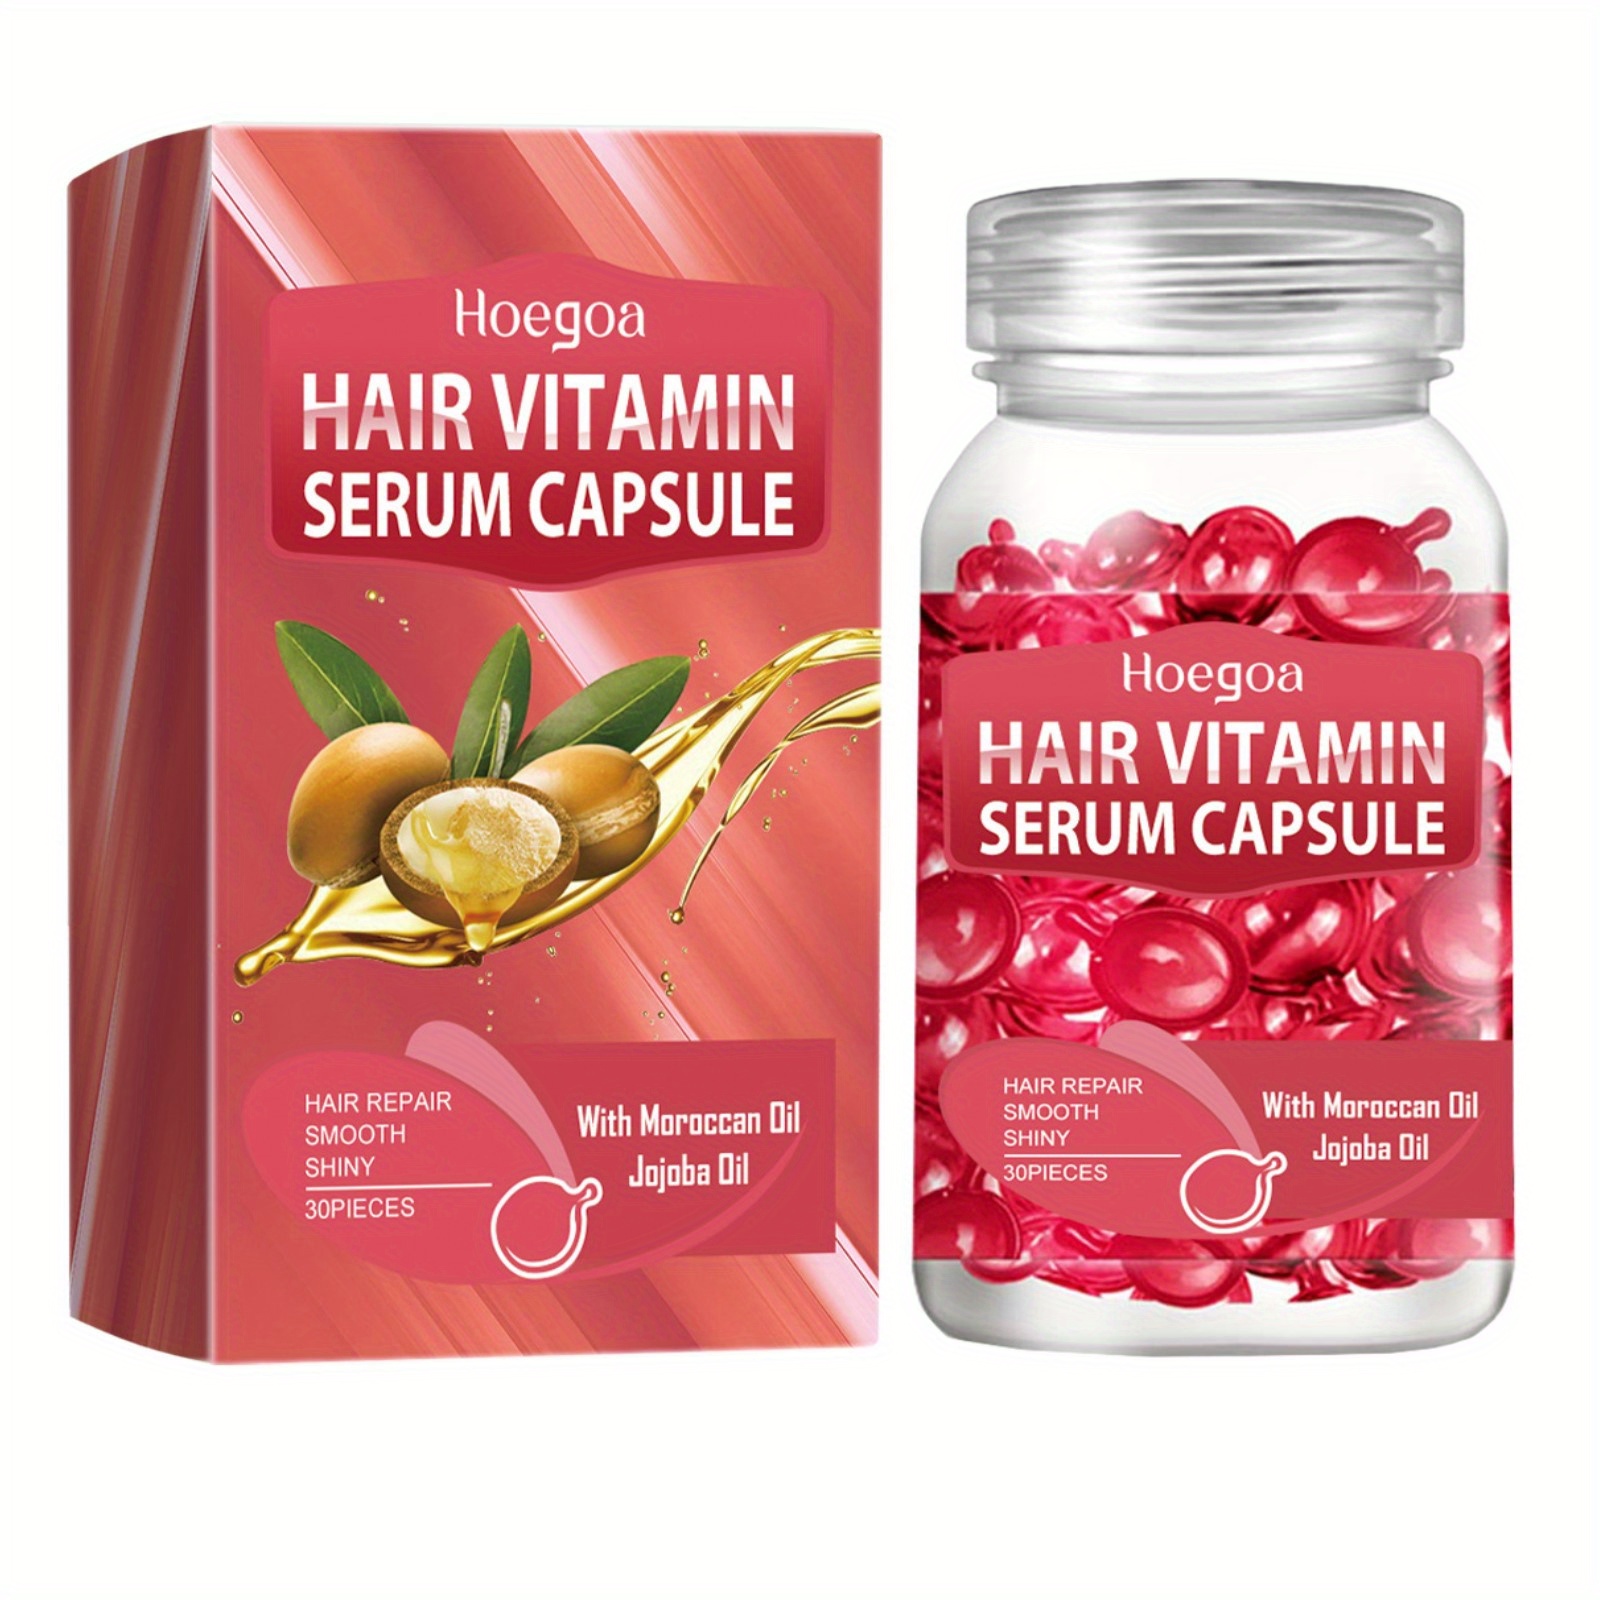 

30pcs/ Bottle Hair Vitamin Serum Capsule, 30pcs, With Moroccan Oil, Jojoba Oil, And Natural Extracts, Hair Care For Smooth, Shiny, Non-split Ends, Revitalizing Hair's Beauty